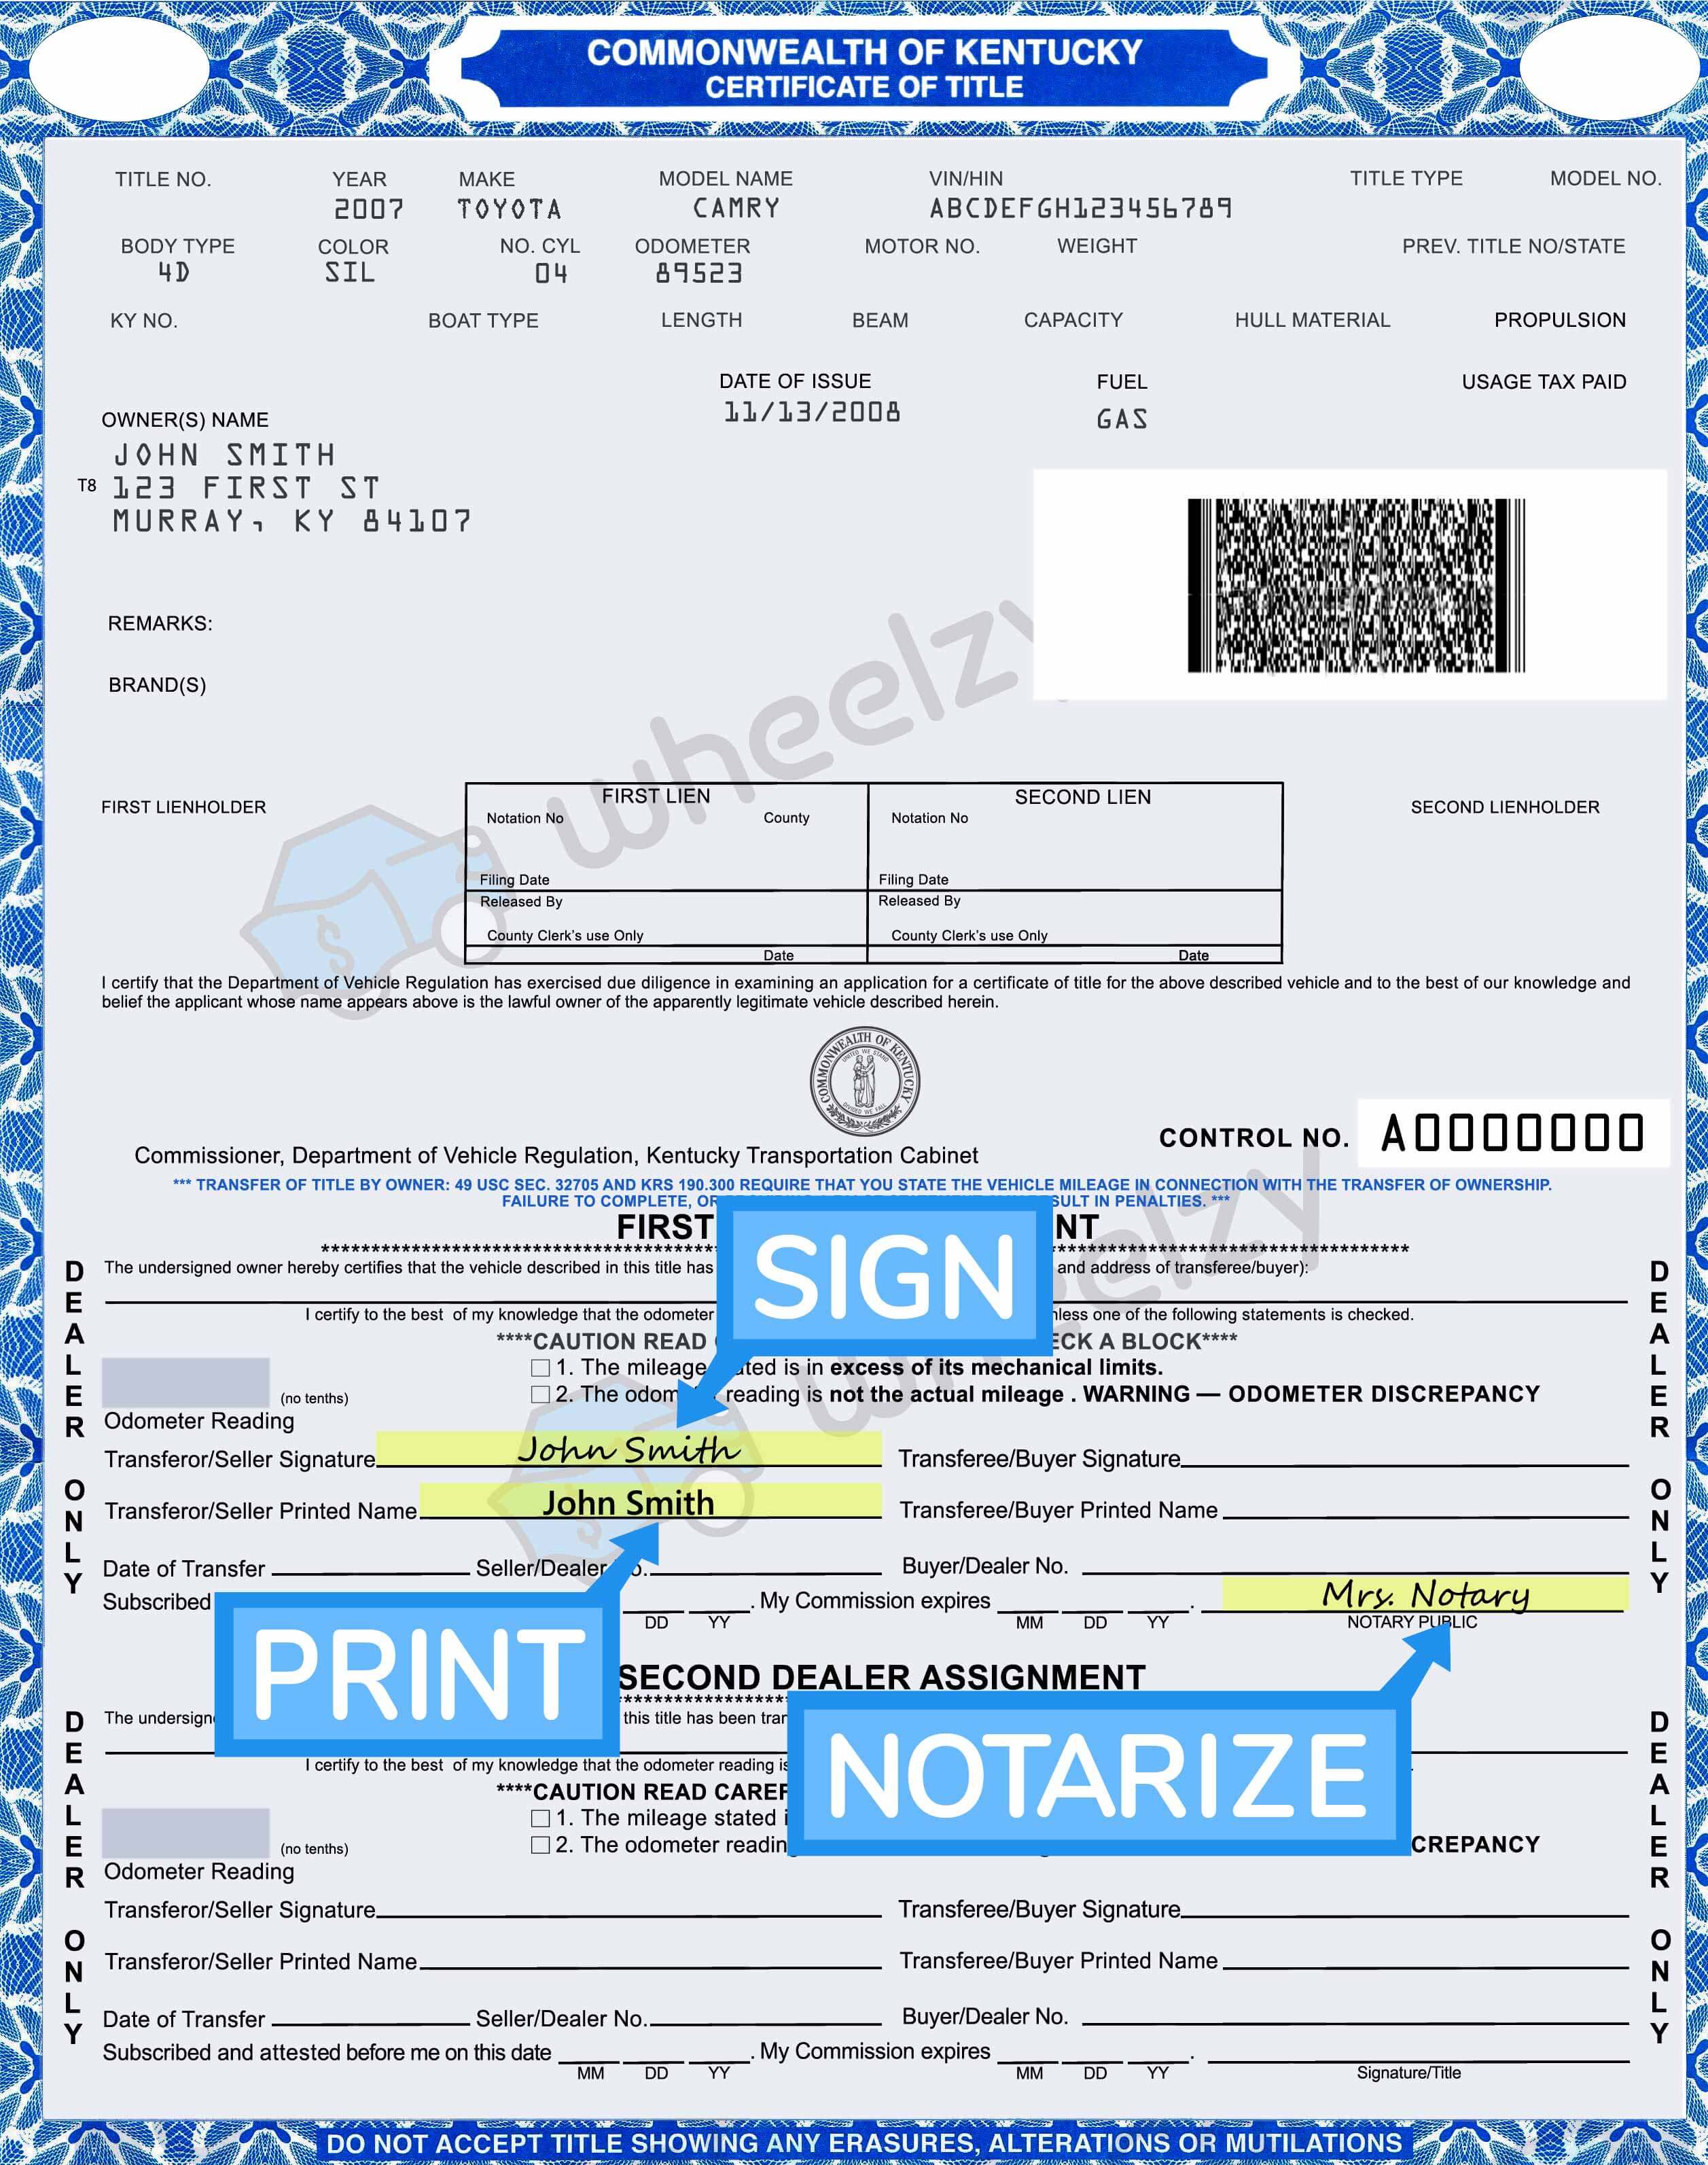 How to Sign Your Title in Florence